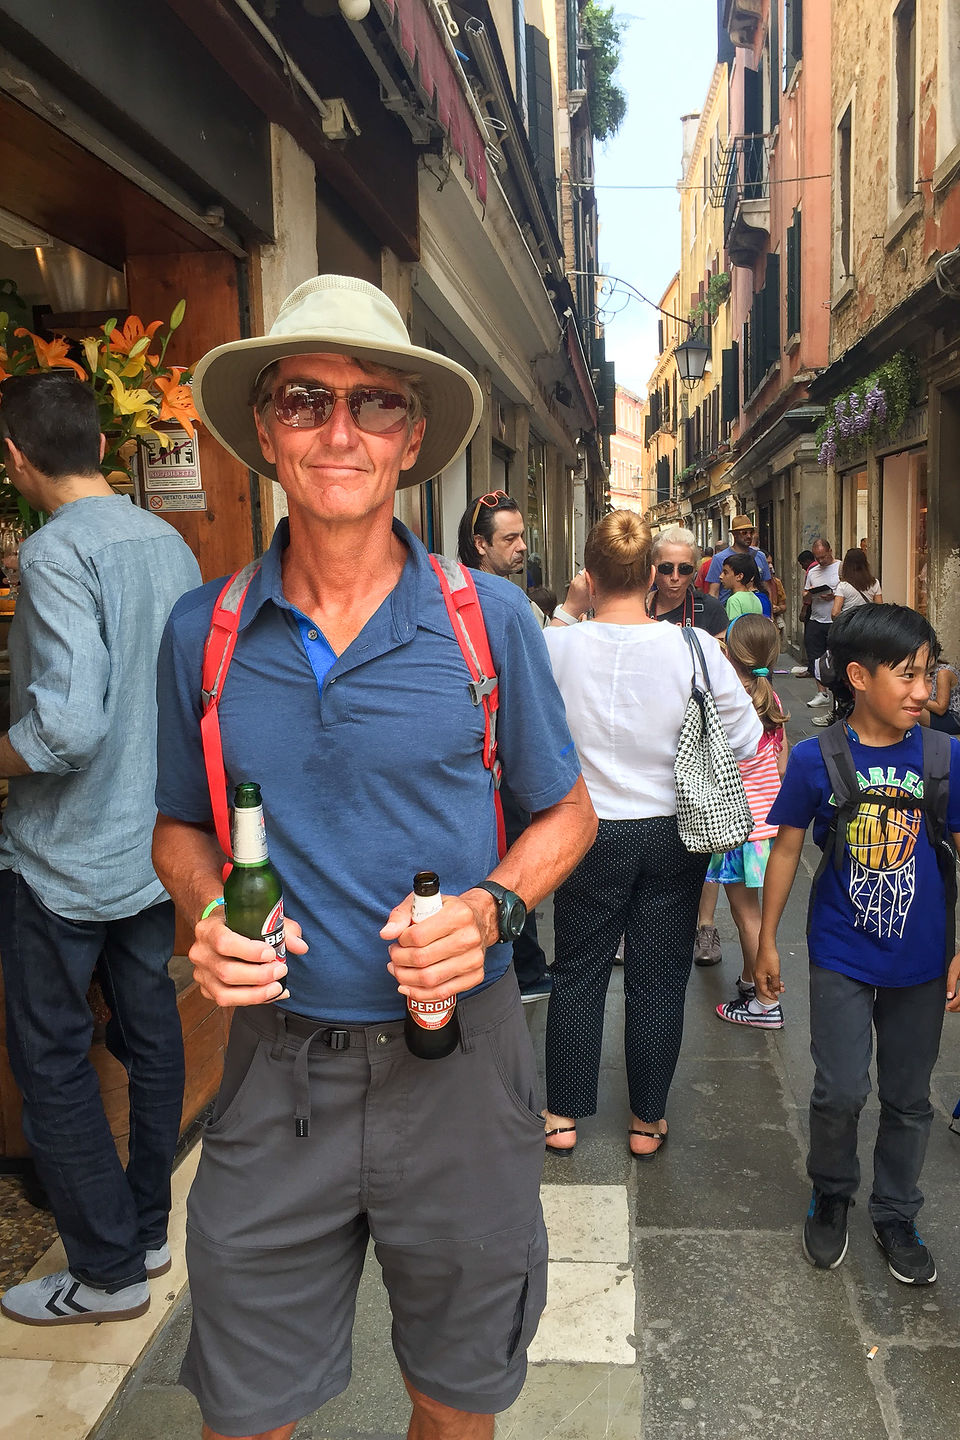 Wandering the back alleys of Venice (with beer)